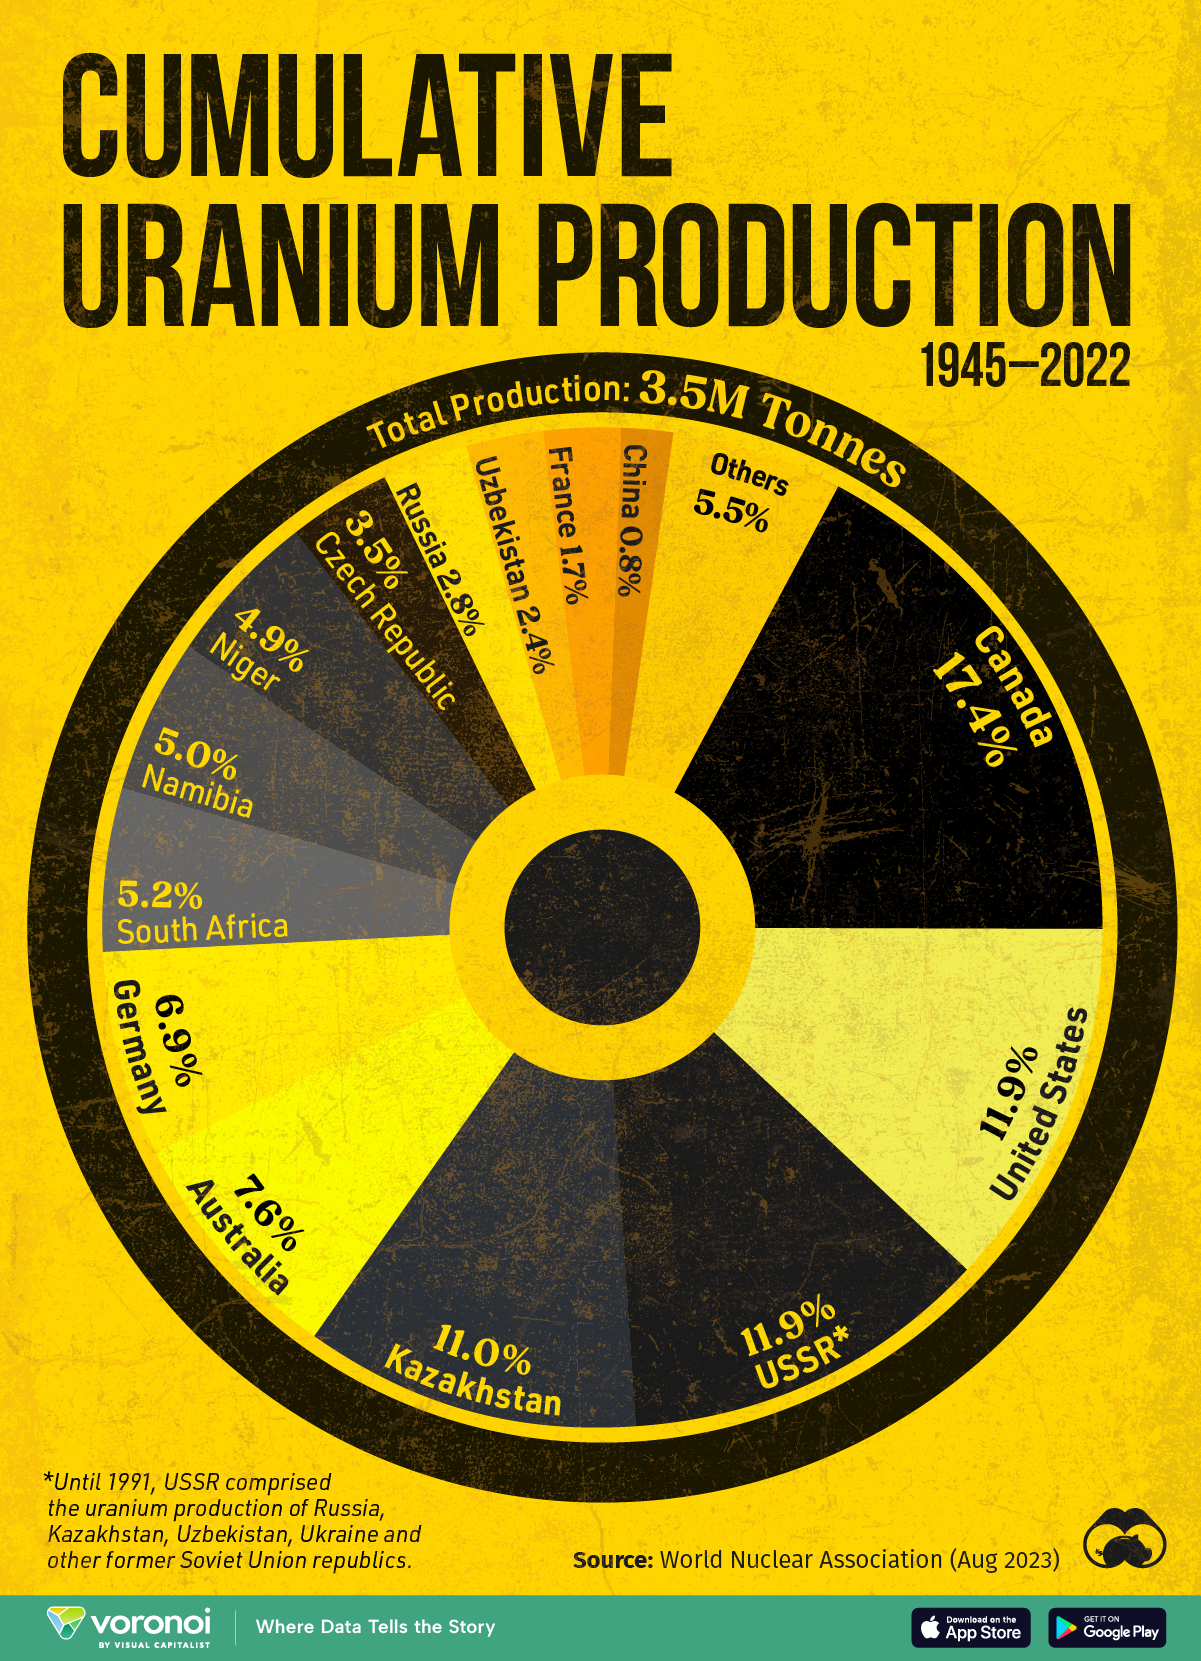 This circle graphic shows uranium production by country from 1945 to 2022.